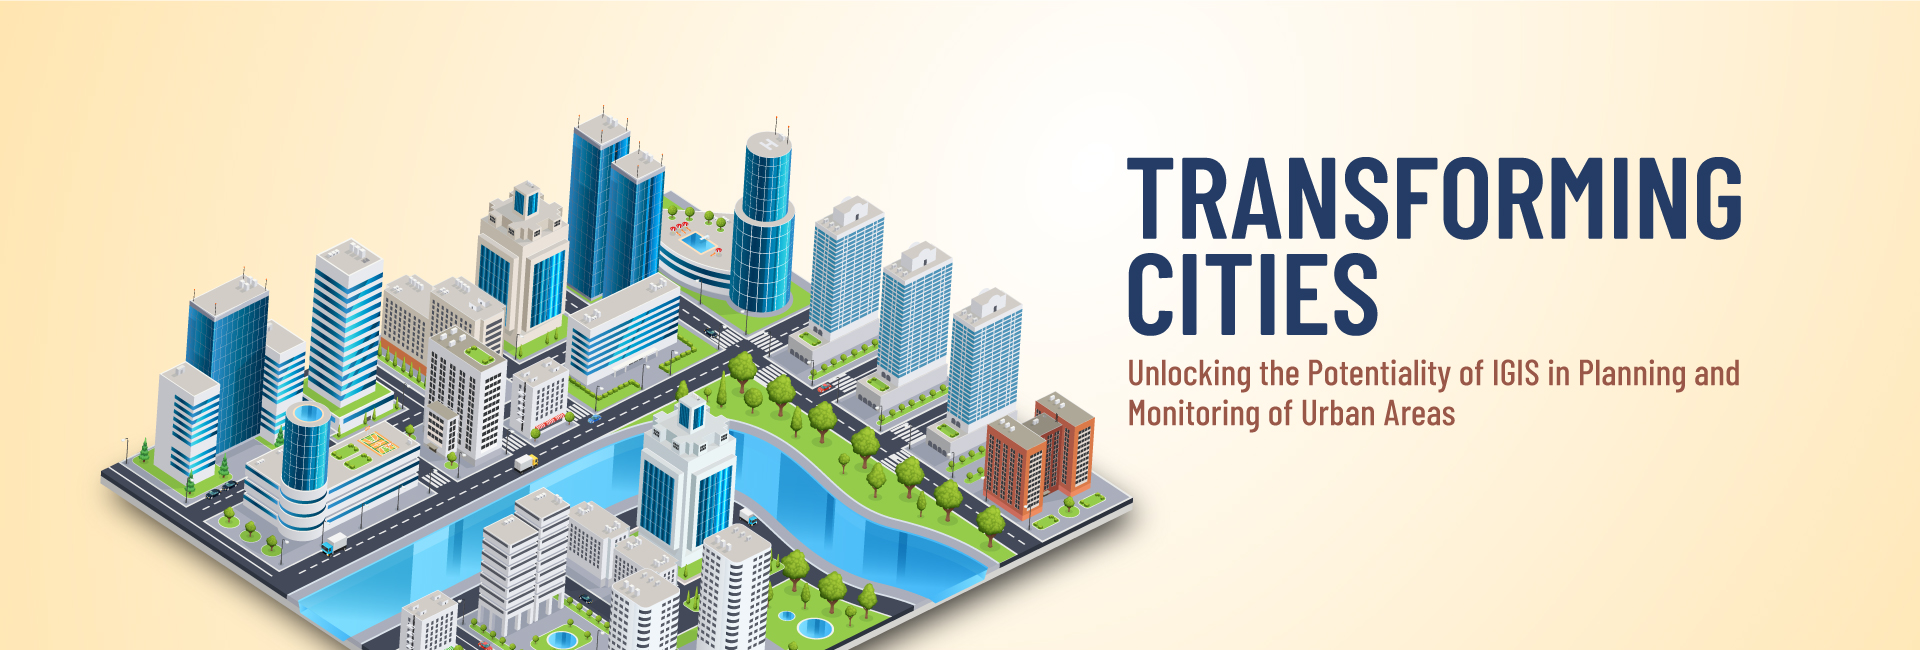 Transforming Cities: Unlocking the Potentiality of IGIS in Planning and Monitoring of Urban Areas